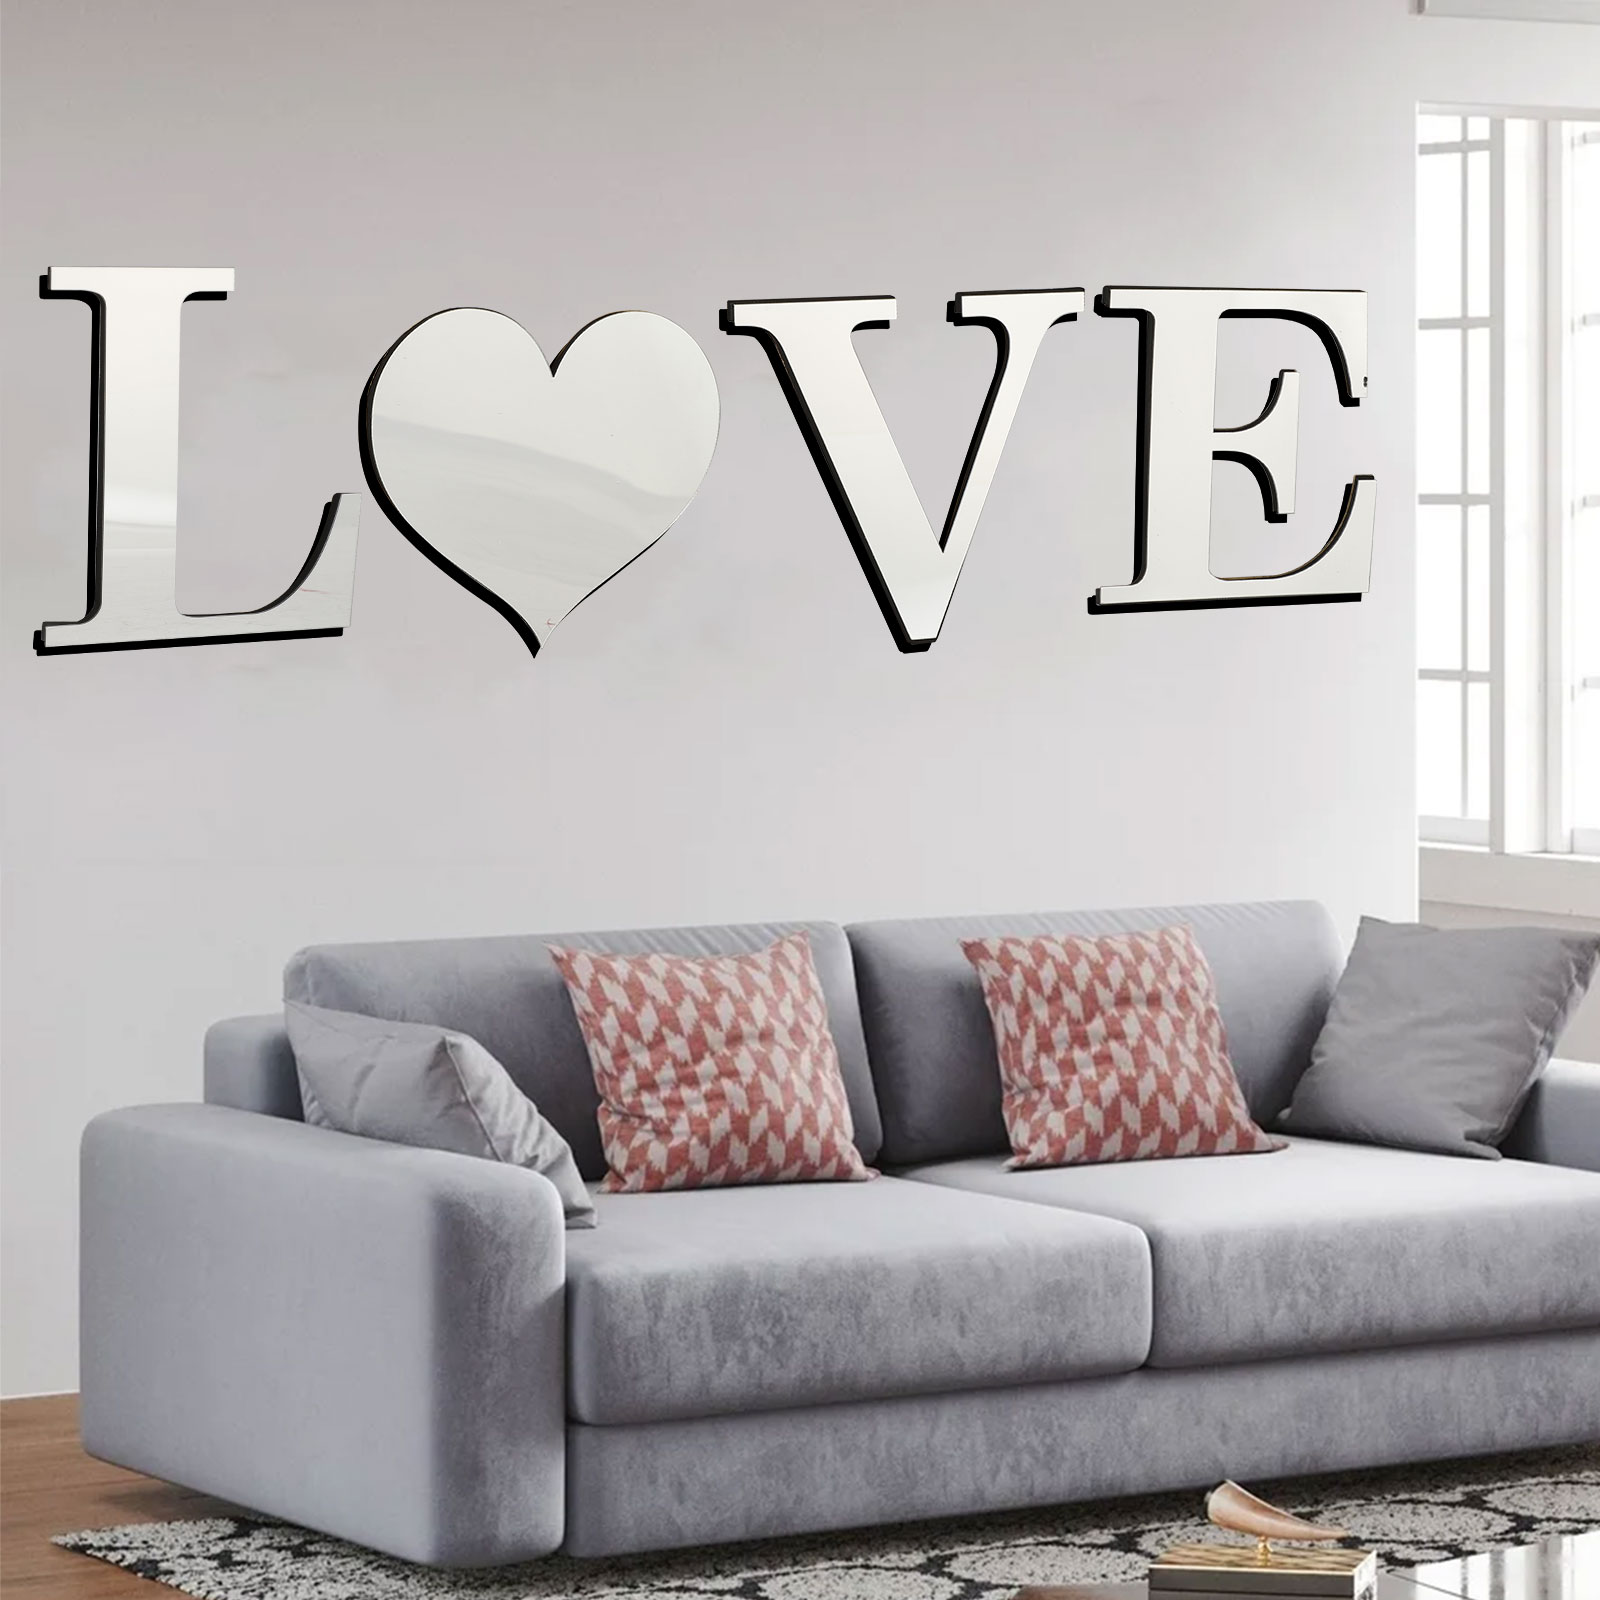 3D Mirror Wall Sticker Decal LOVE Letter Art Vinyl Removable For Home Room Decor 